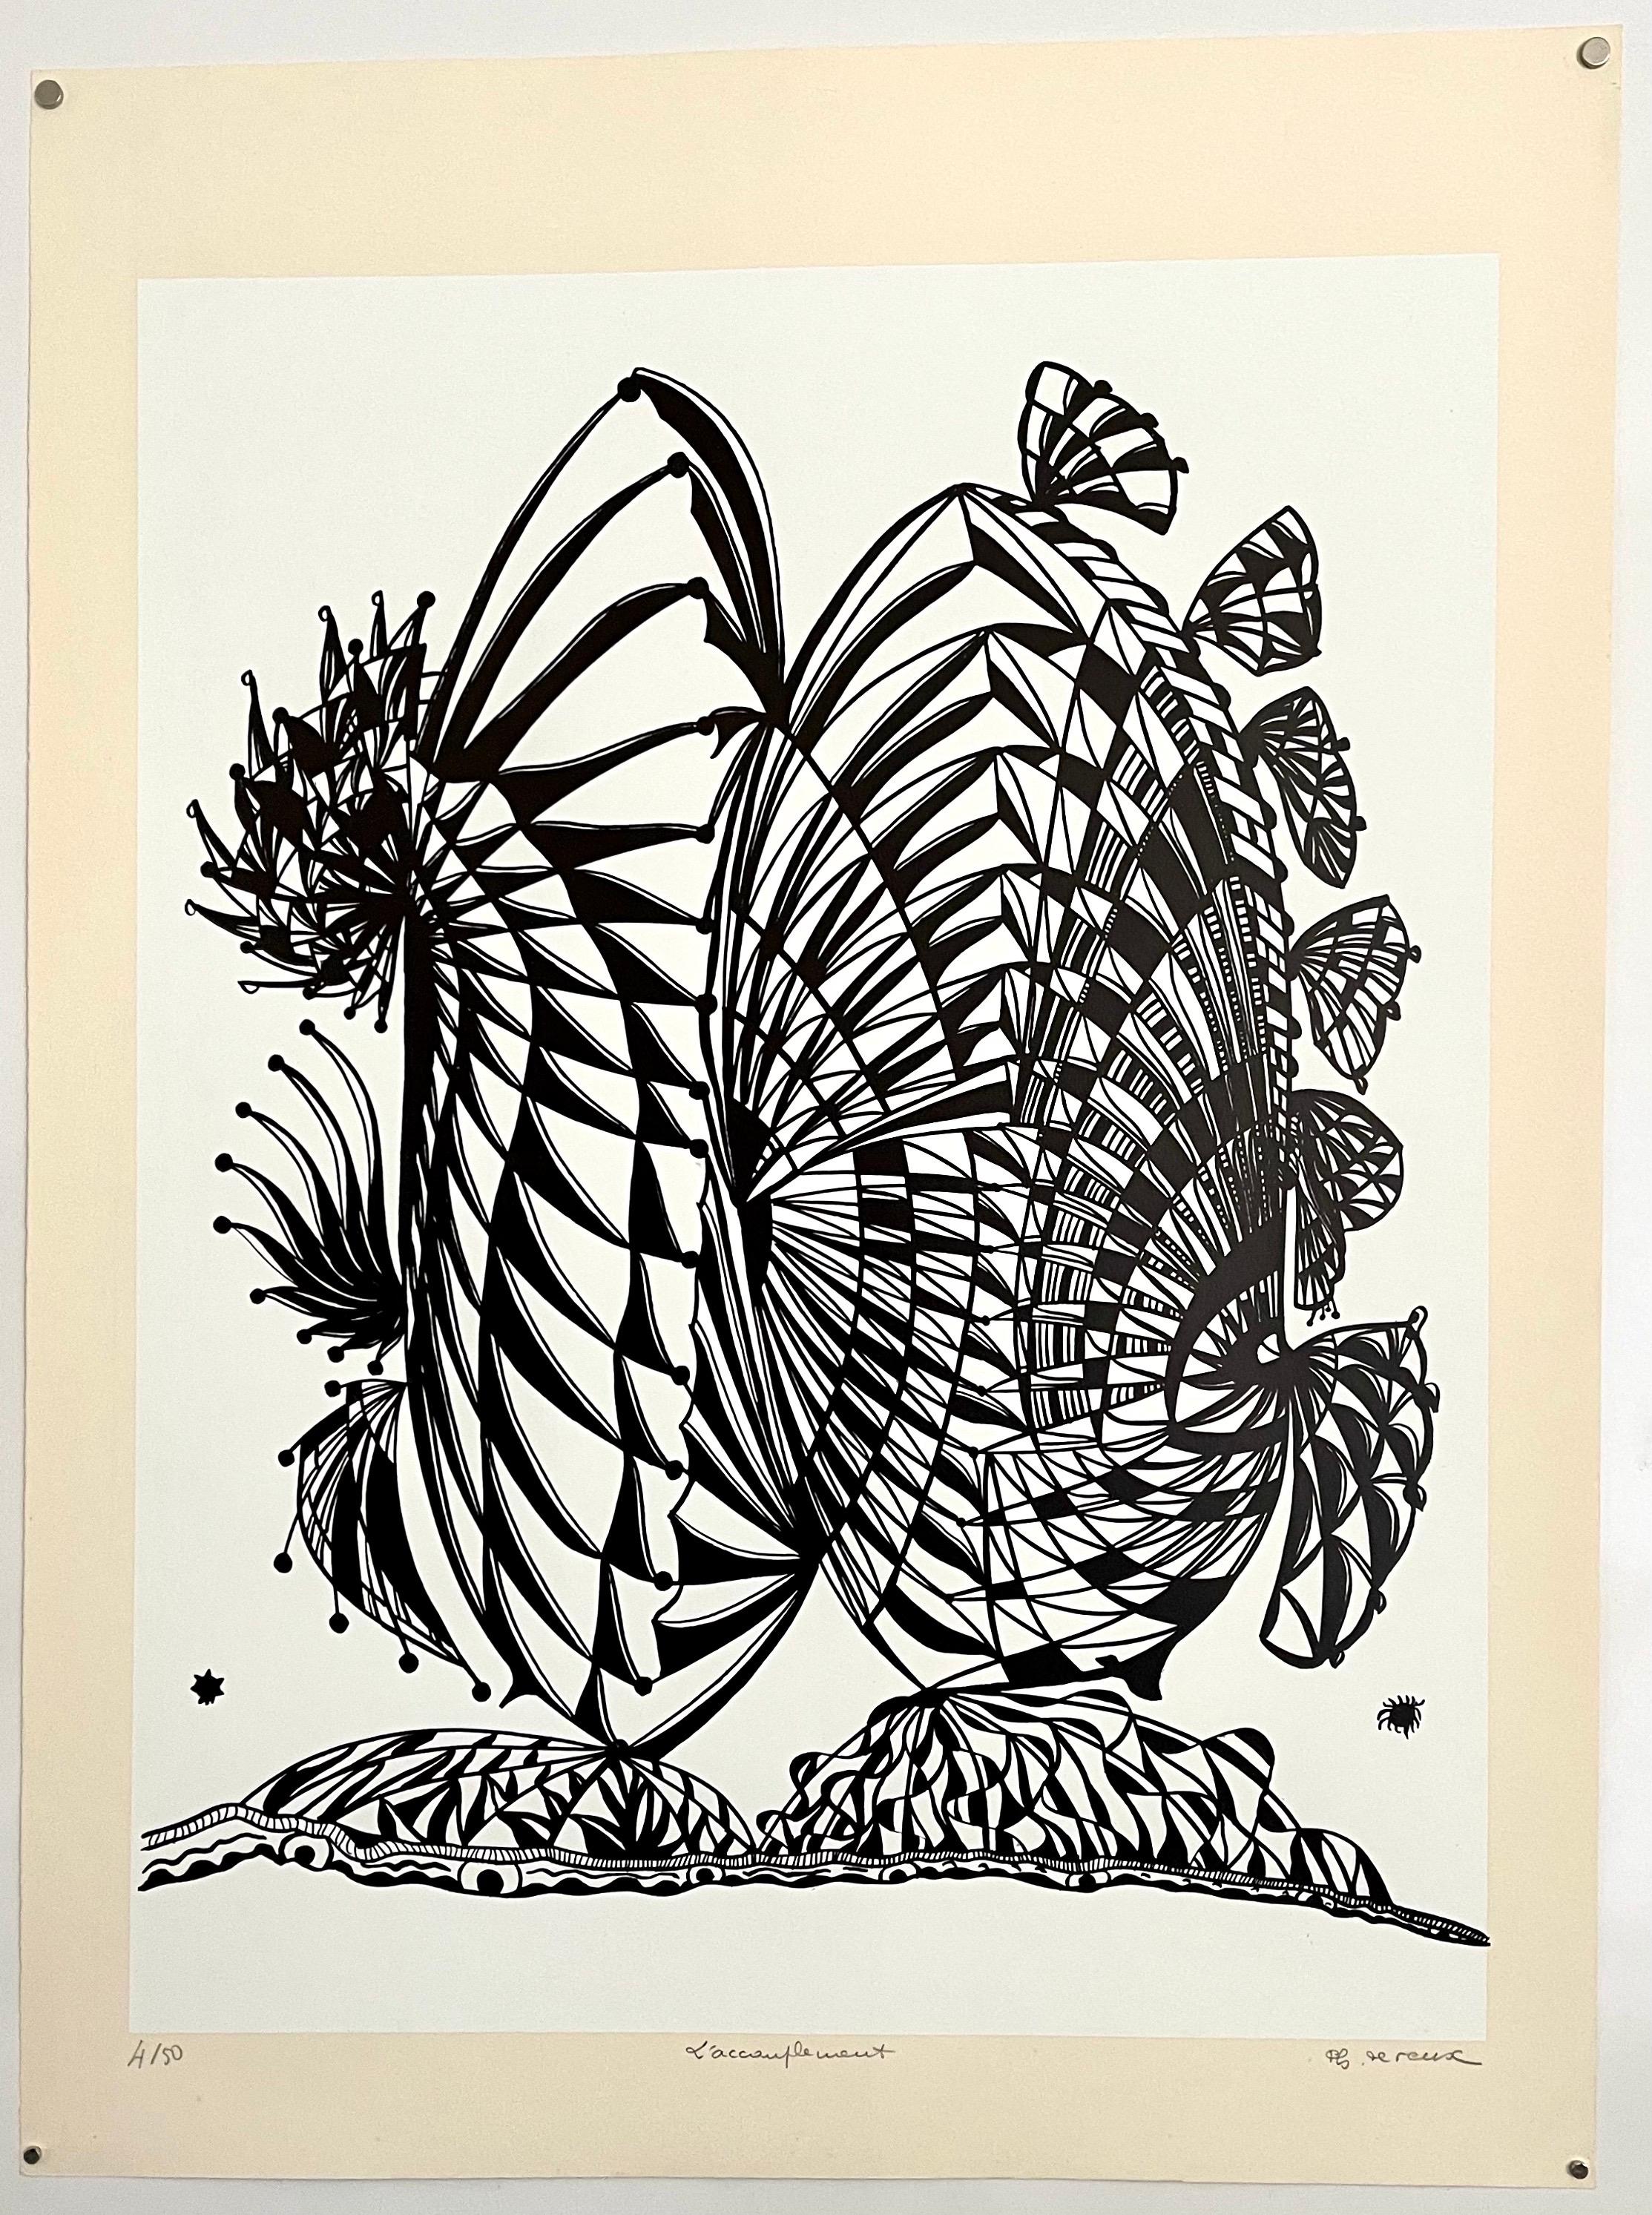 printed by Pierre Chave, Vence, published by Bianchi Frères in Nice, France
ink on watermarked chiffon de Mandeure paper, hand signed in pencil lower right, "PH Dureux," numbered 4/50 lower left, titled in pencil center.
This might be a silkscreen